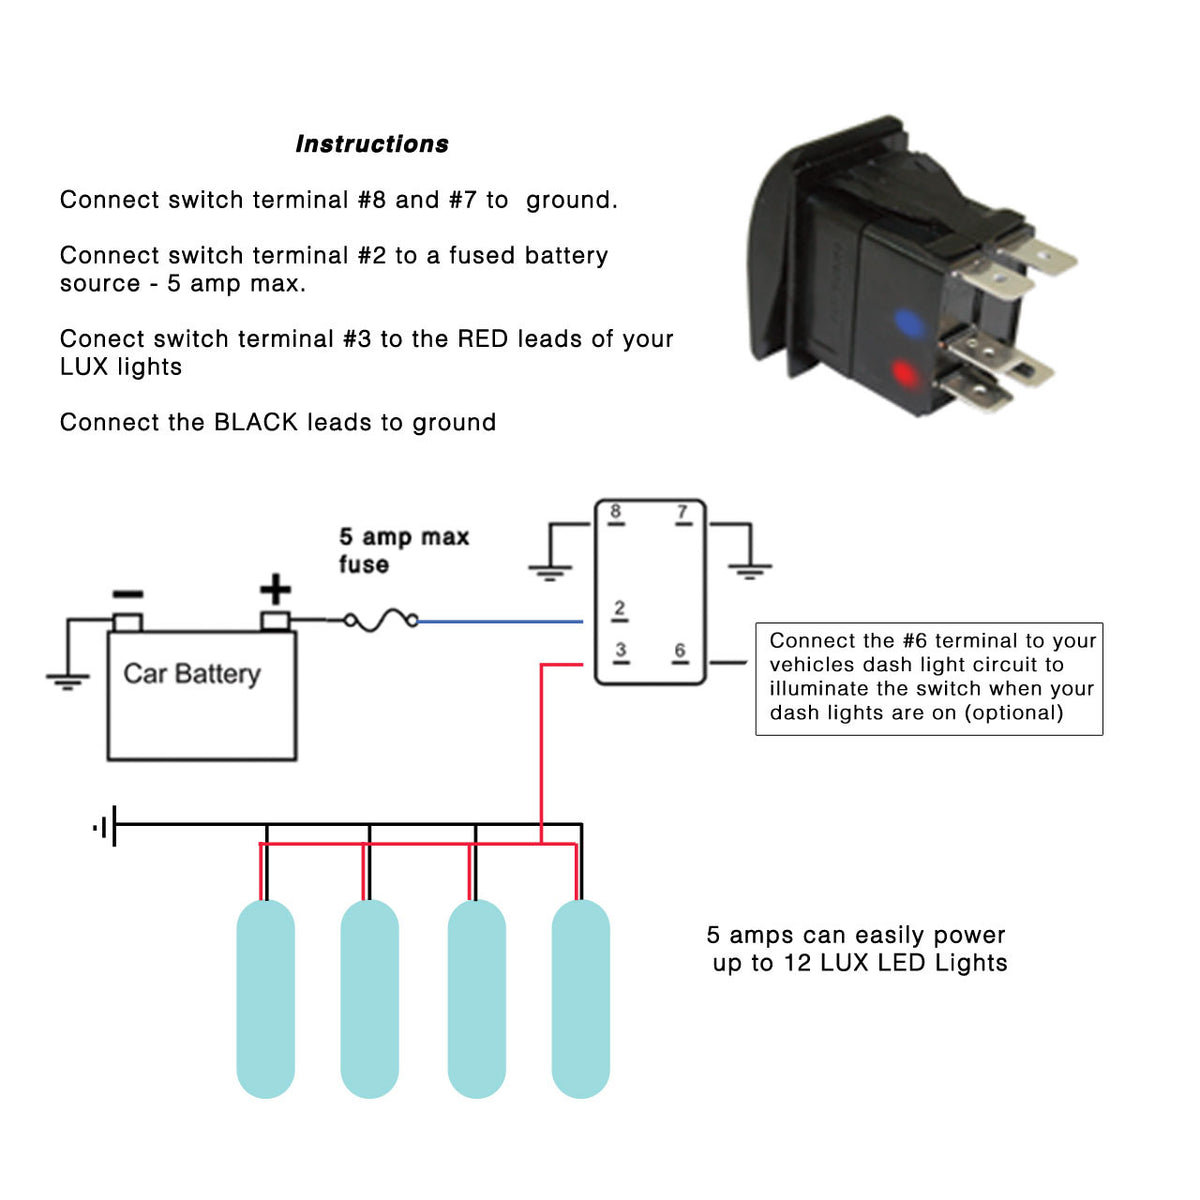 LUX Lighting Systems LED Rocker Switch Instructions